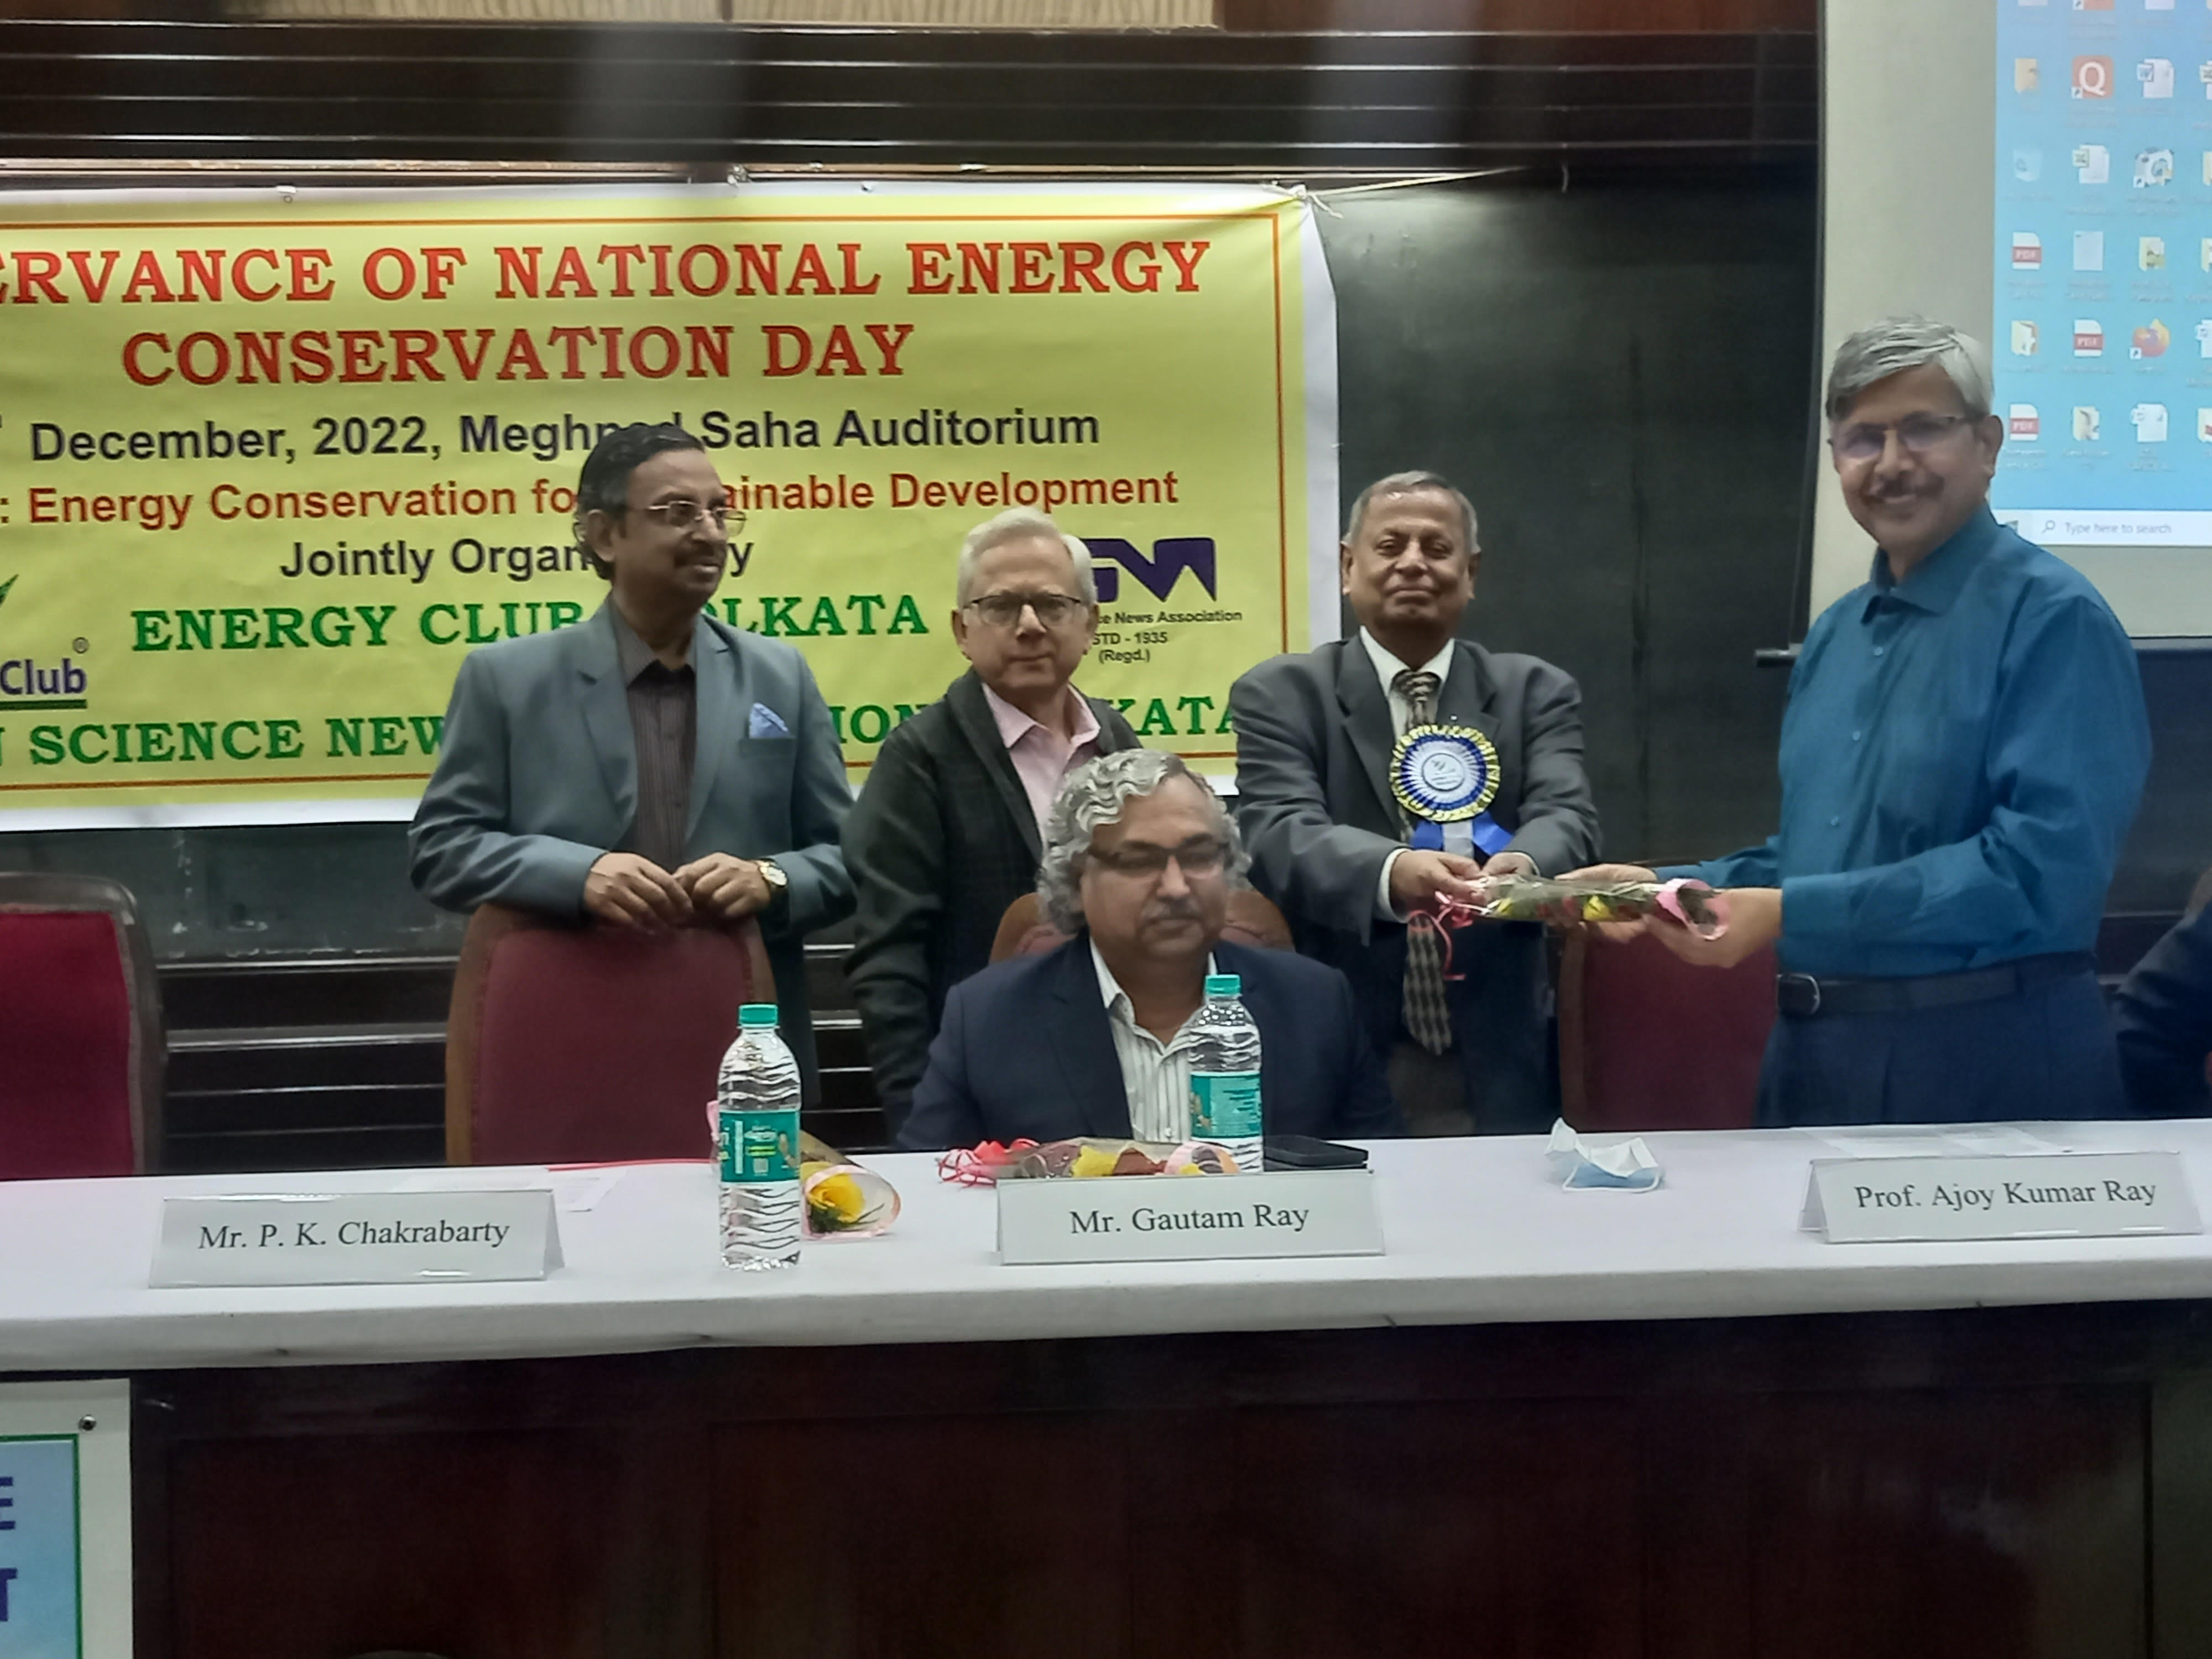 Observance of National Energy Conservation Day, Date: 14th December, 2022